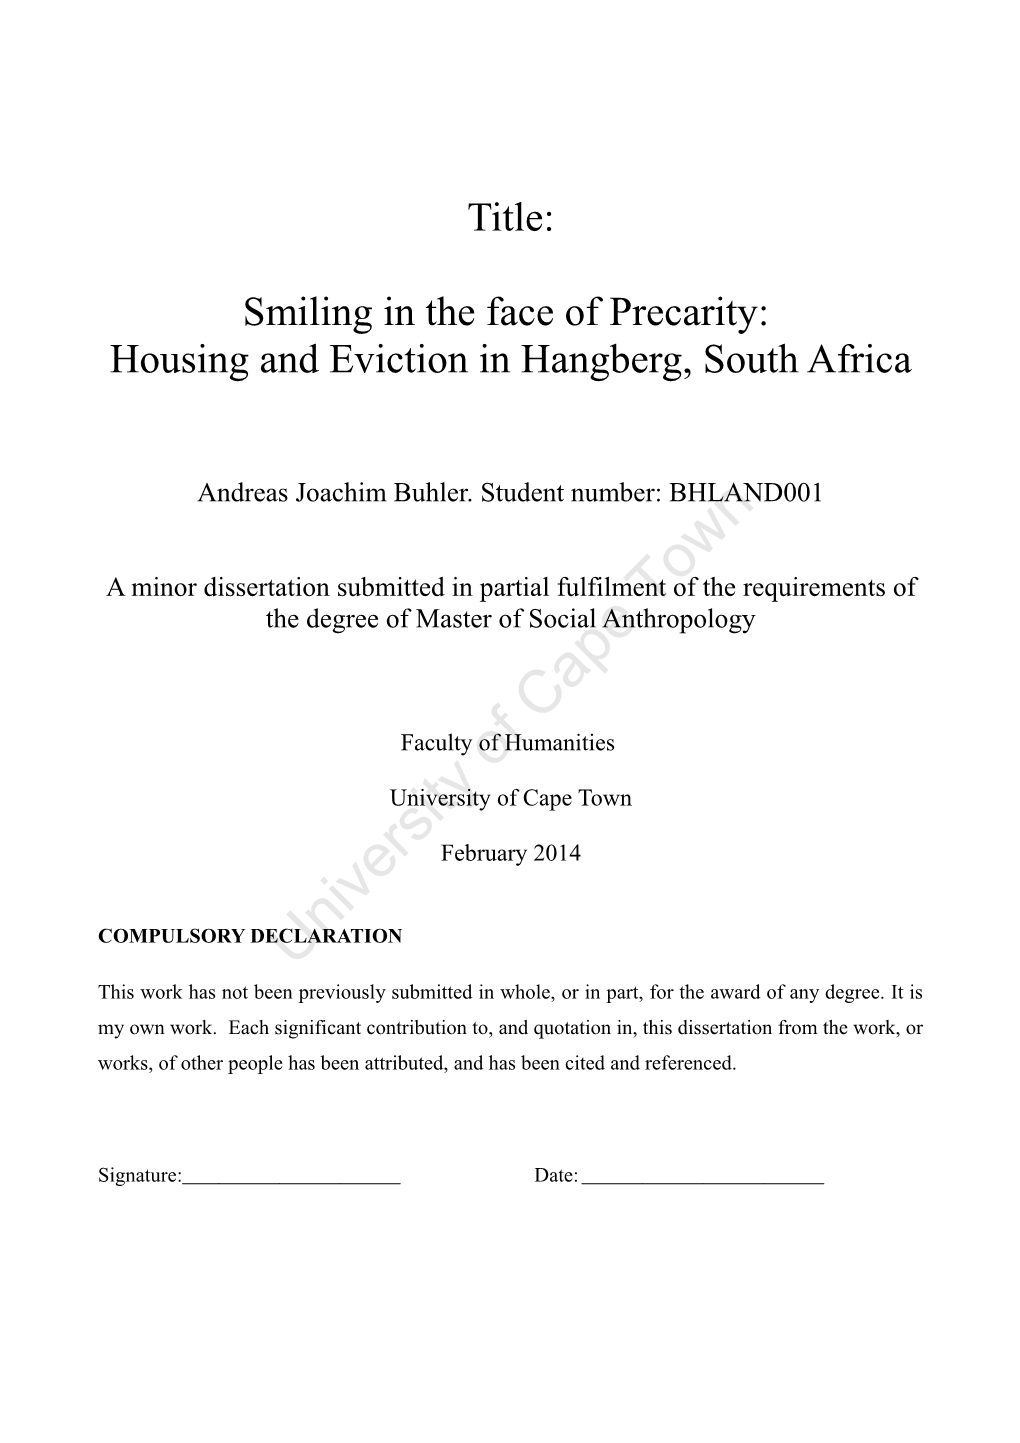 Housing and Eviction in Hangberg, South Africa